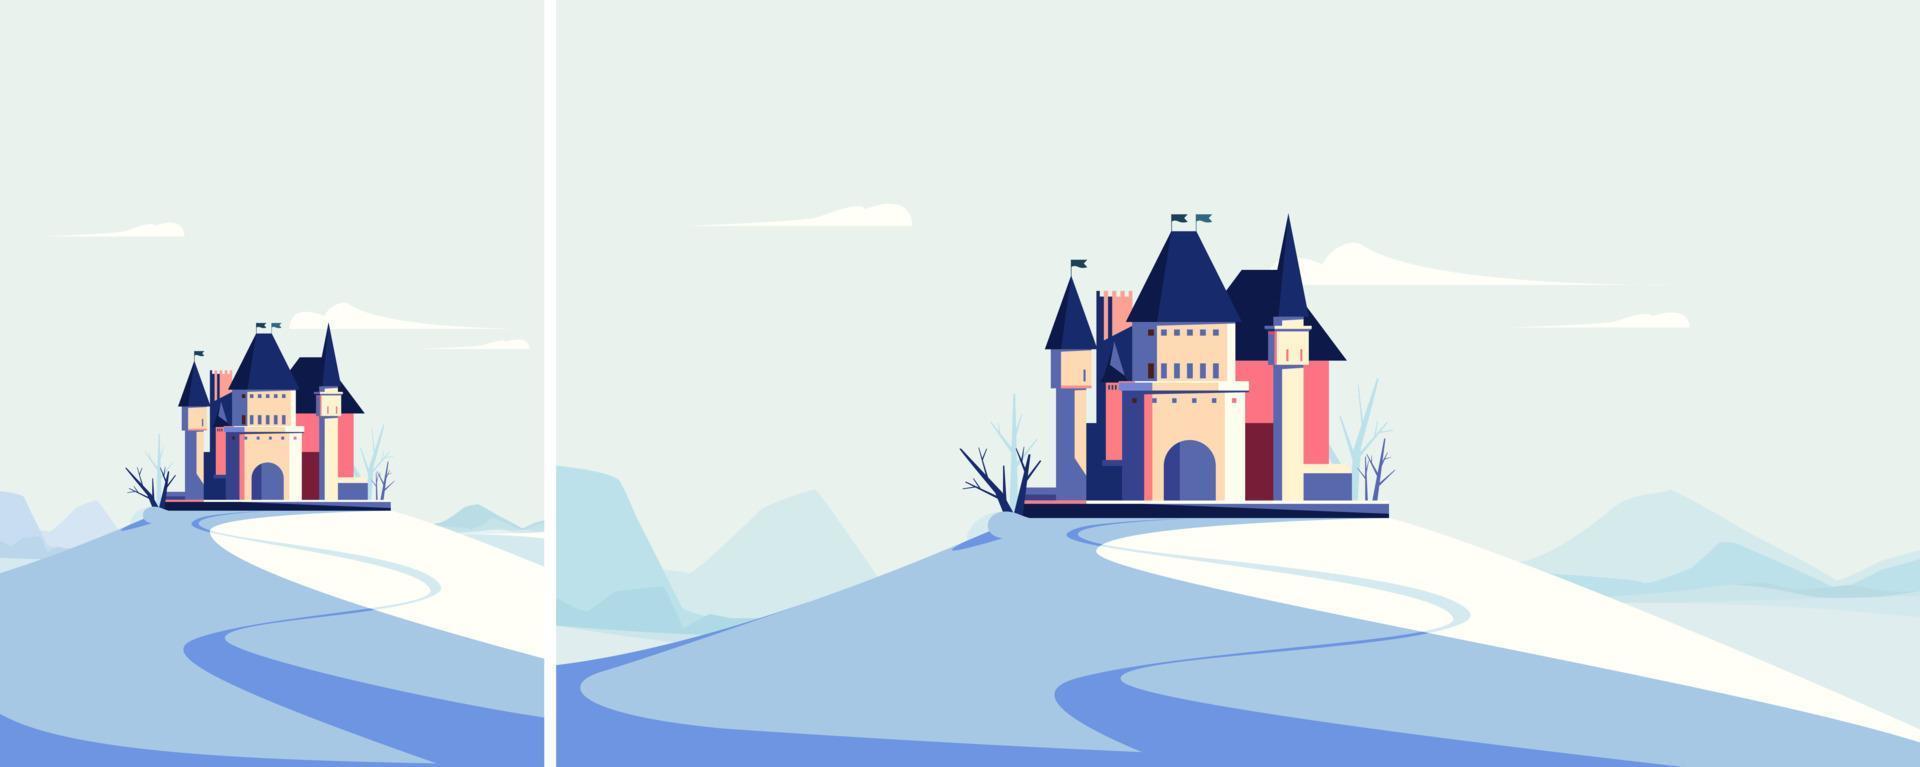 Castle on the hill in winter season. Landscape with medieval building in different formats. vector